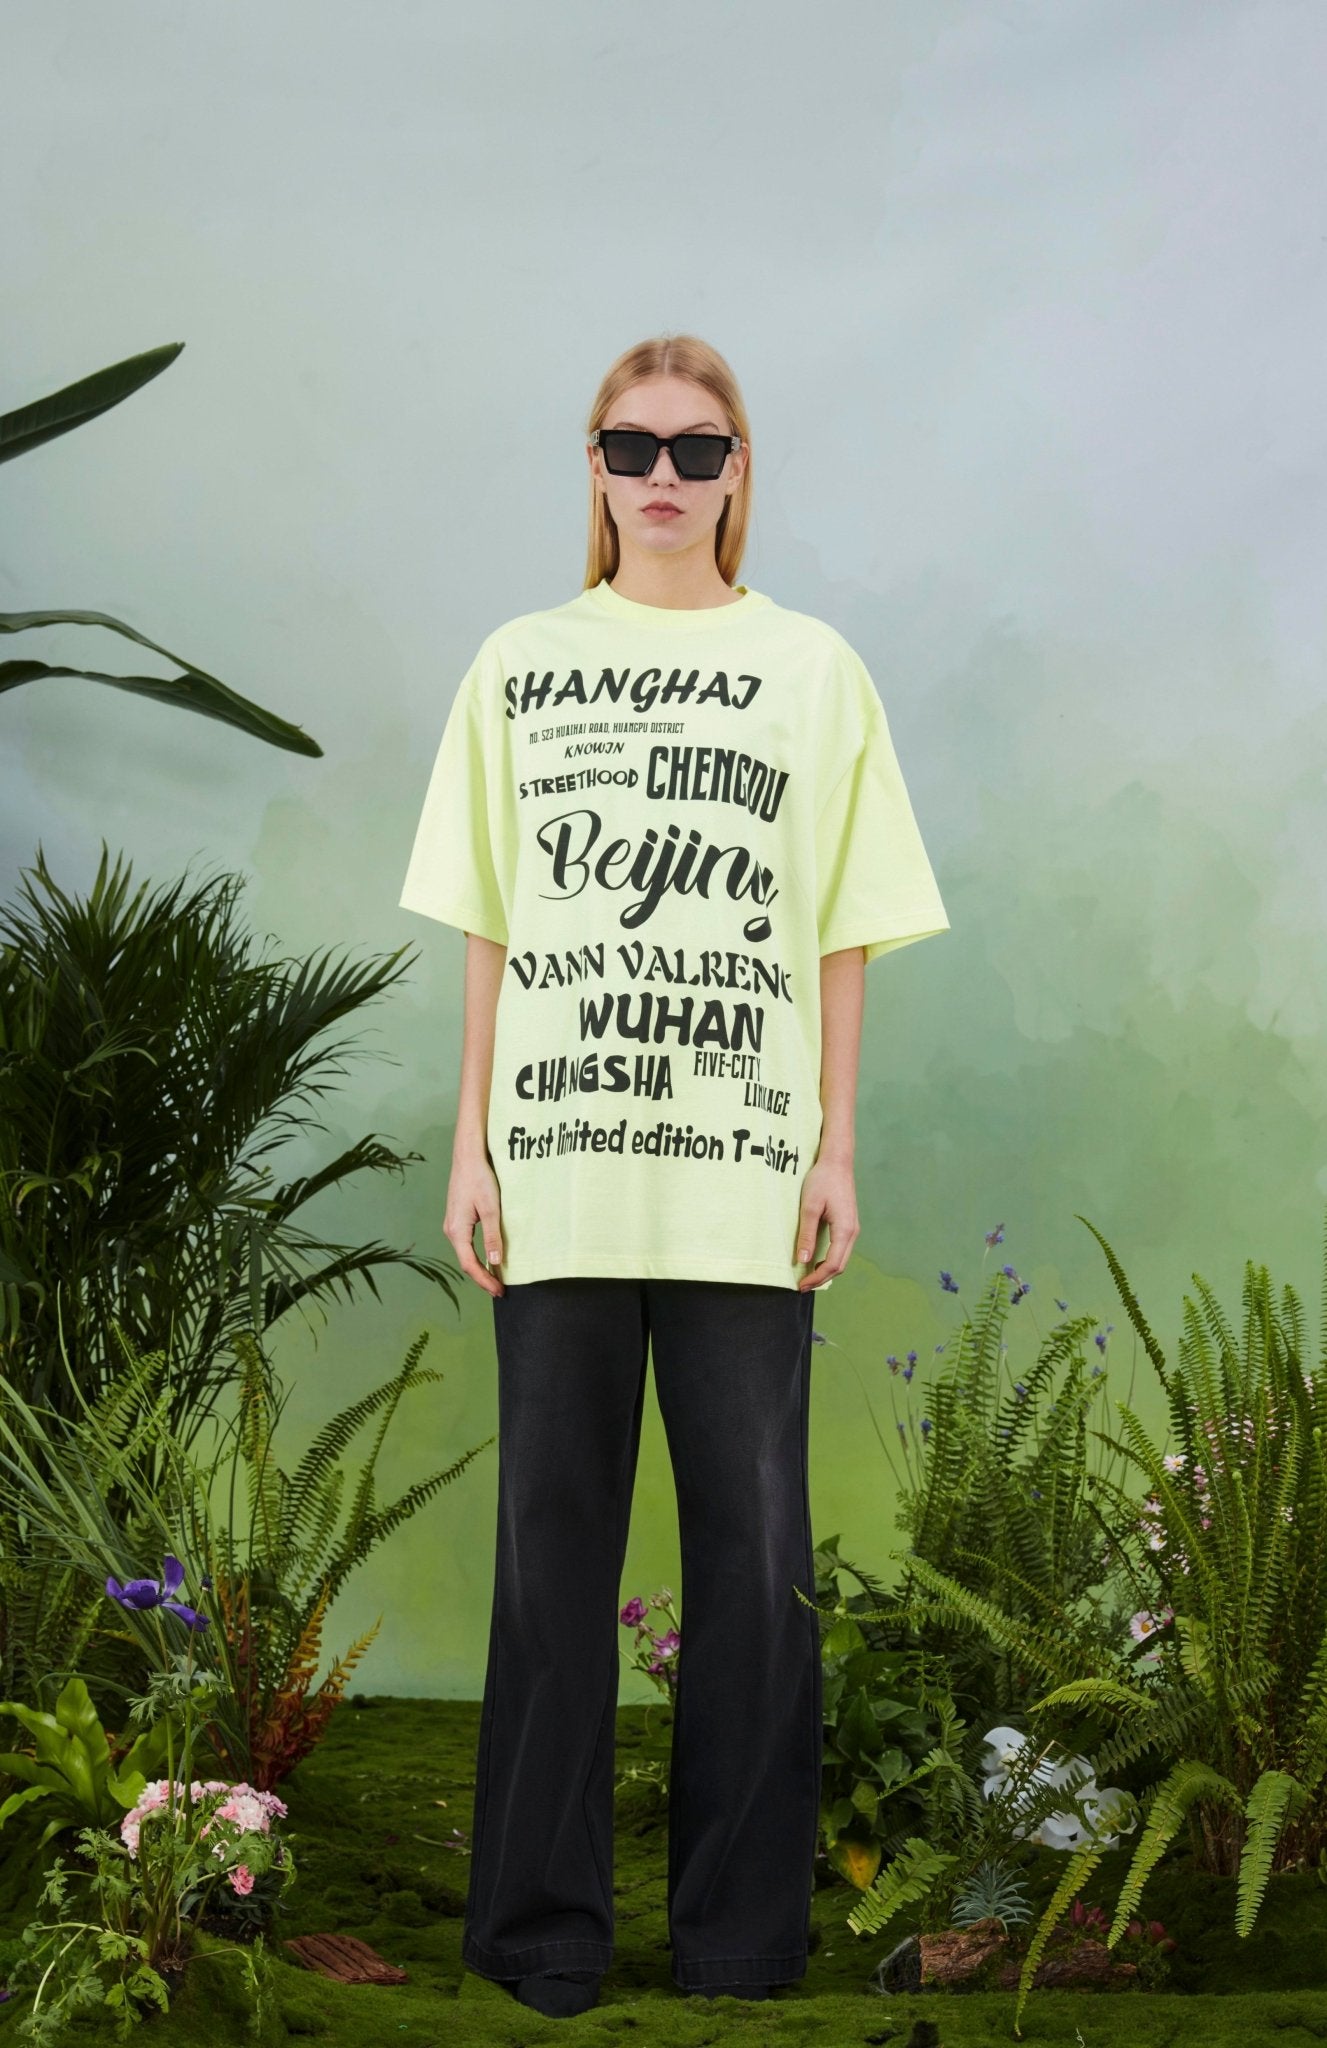 VANN VALRENCÉ Green "Five Cities Linkage" Limited Compassion T-shirt | MADA IN CHINA